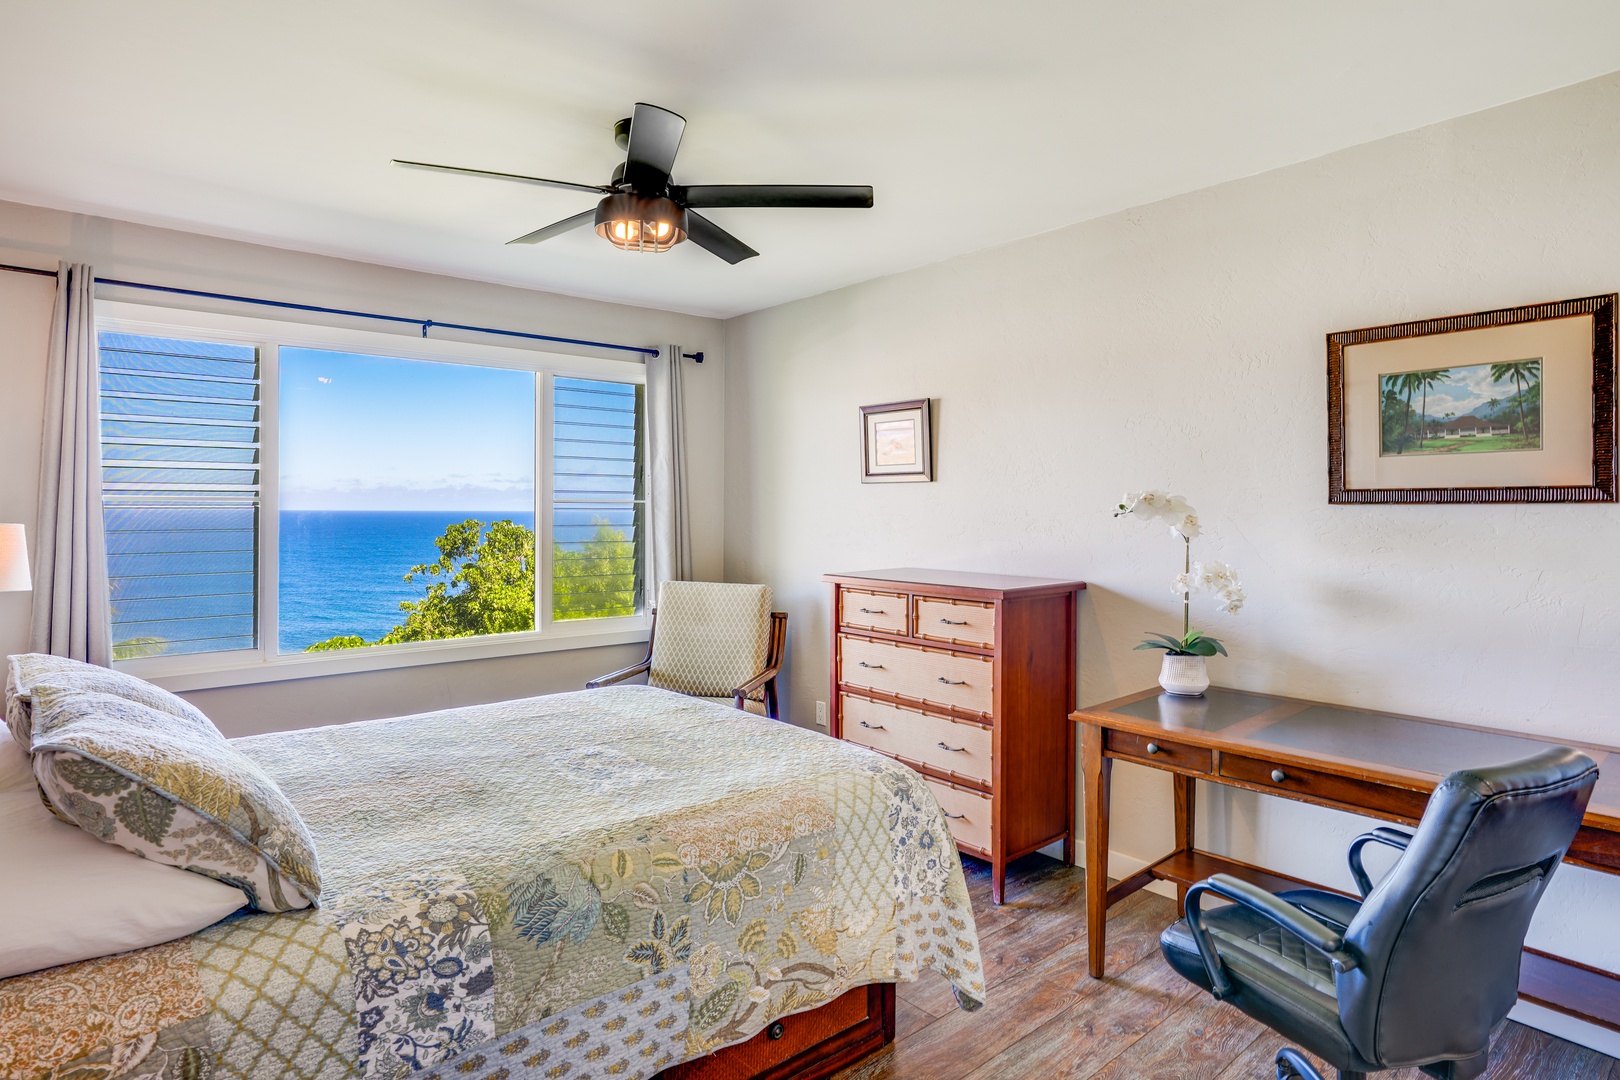 Princeville Vacation Rentals, Alii Kai 7201 - Wake up to the tropical beauty from the primary suite.